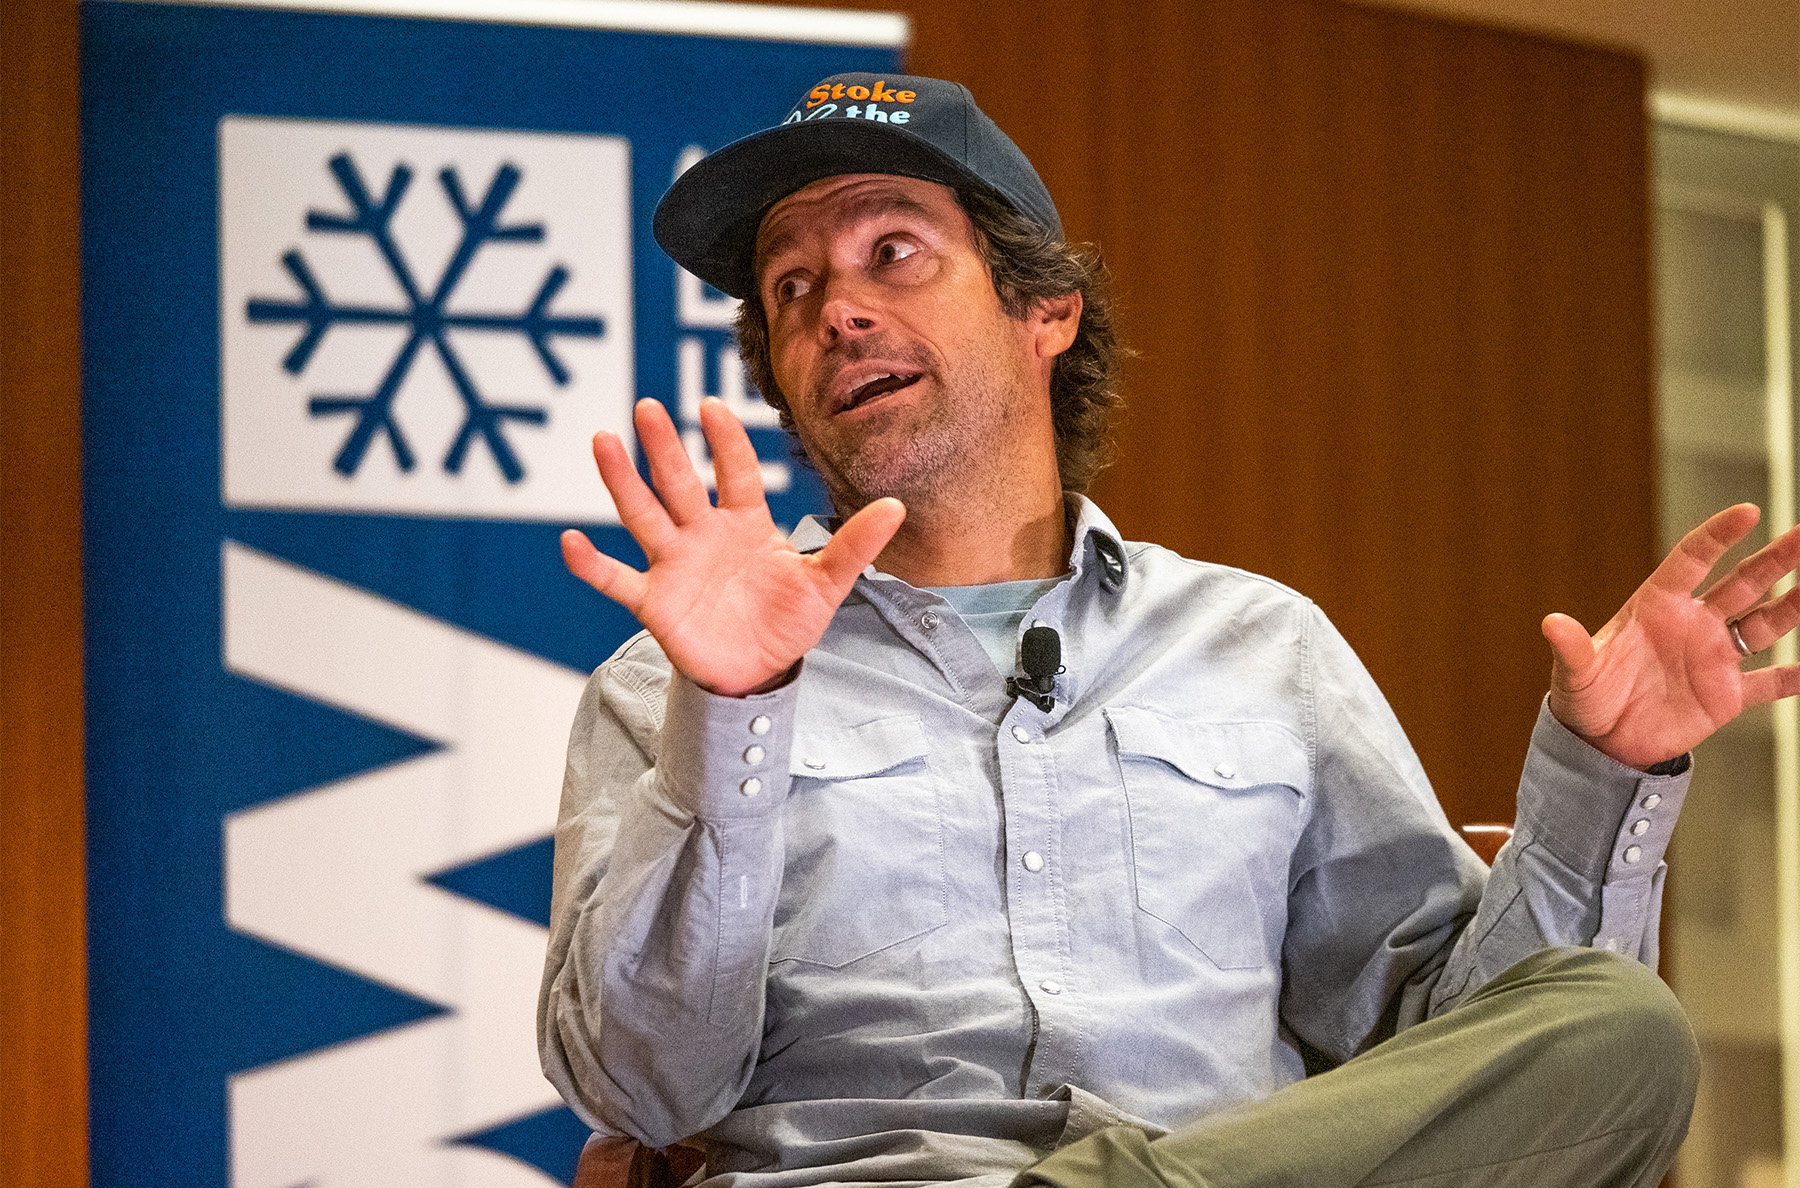 Blister Podcast: Jeremy Jones came to Western Colorado University for another installment of our Blister Speaker Series to discuss filming, snowboarding, founding POW, the ‘outdoor state,’ POW’s ongoing and evolving efforts to address climate change, and more.